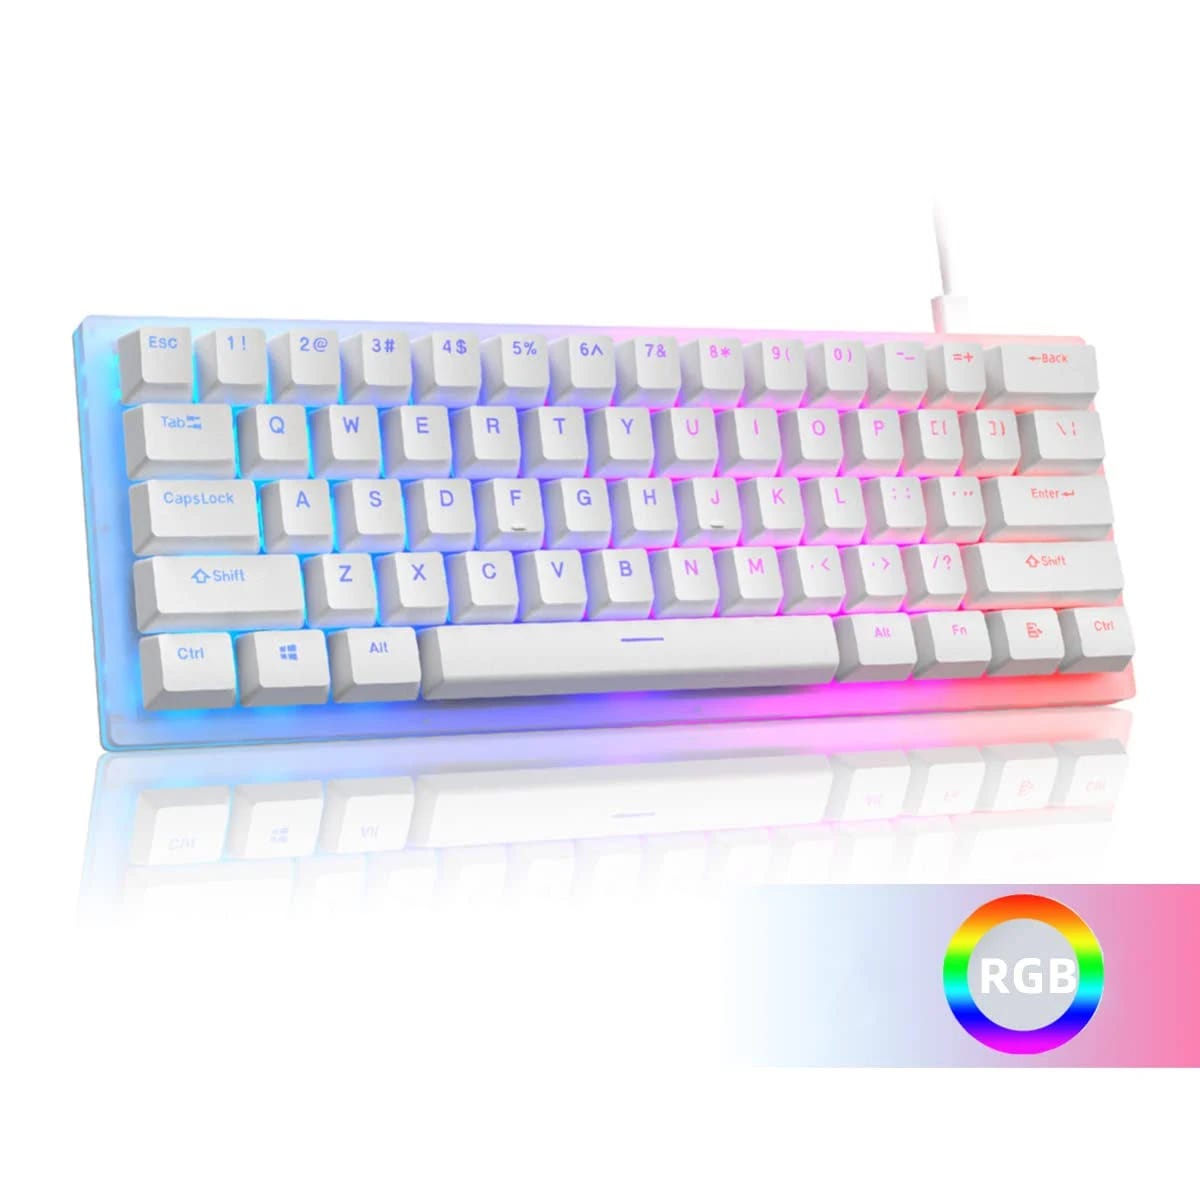 Womier K61: Customizable Hot-Swappable Gaming Keyboard with RGB Lighting | Image